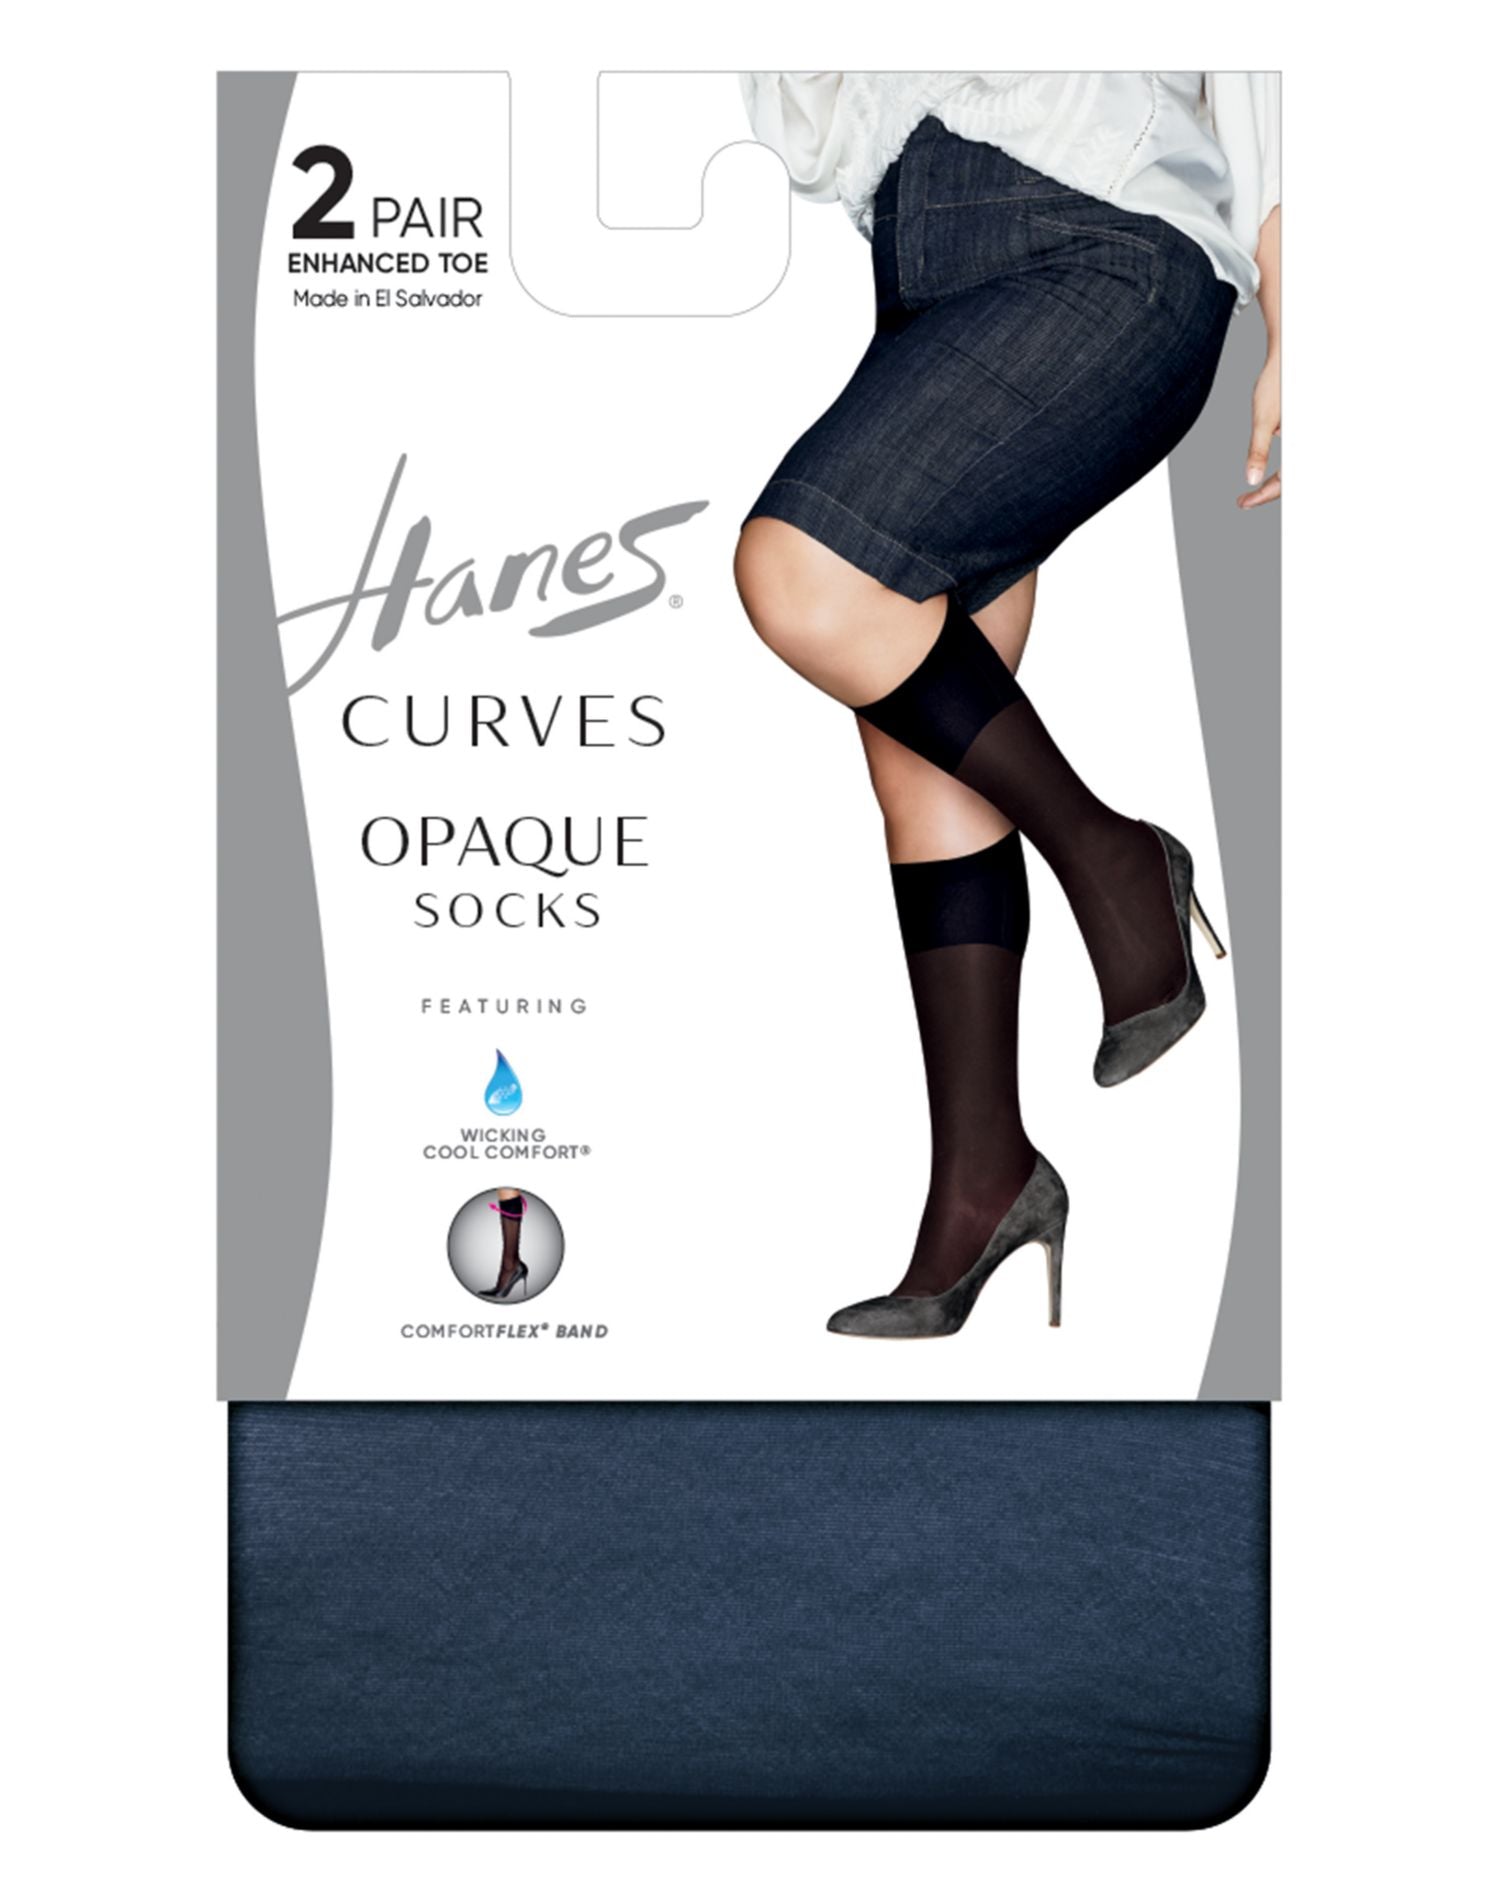 HSP021 - Hanes Womens Curves Opaque Socks 2-Pack